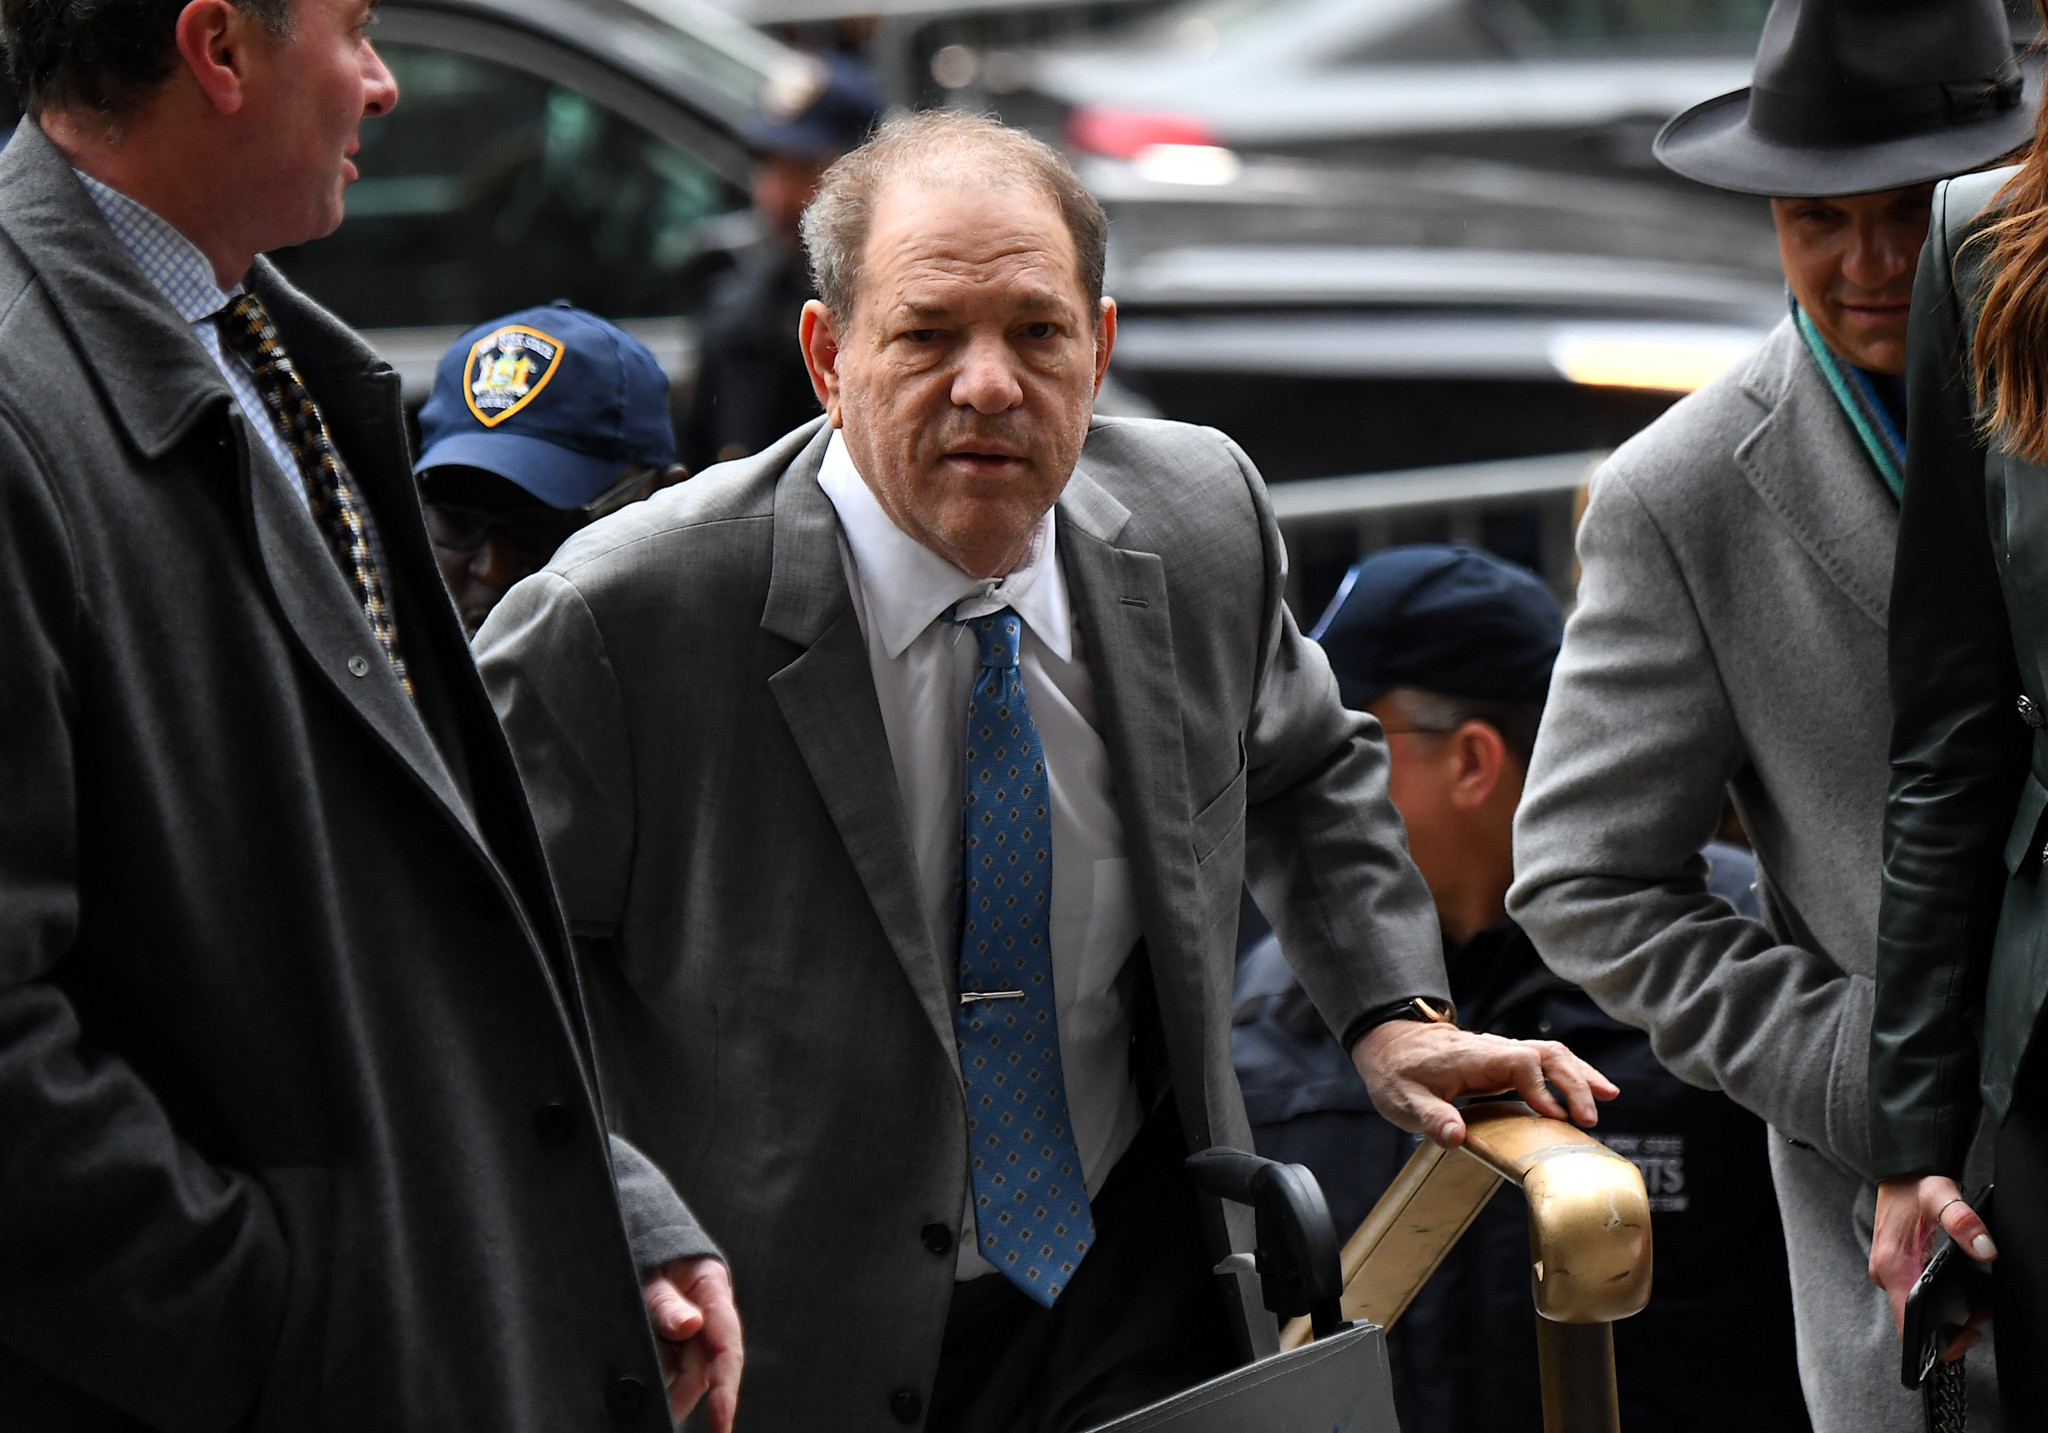 Harvey Weinstein arrives at the Manhattan Criminal Court, on February 18, 2020 in New York City. Jurors will begin deliberating the fate of ex-Hollywood titan Harvey Weinstein on Tuesday in his high-profile sex crimes trial that marked a watershed moment in the #MeToo movement. The disgraced movie mogul, 67, faces life in prison if the jury of seven men and five women convict him of predatory sexual assault charges in New York.More than 80 women have accused Weinstein of sexual misconduct since allegations against him ignited the #MeToo global reckoning against men abusing positions of power in October 2017. (Photo by Johannes EISELE / AFP)